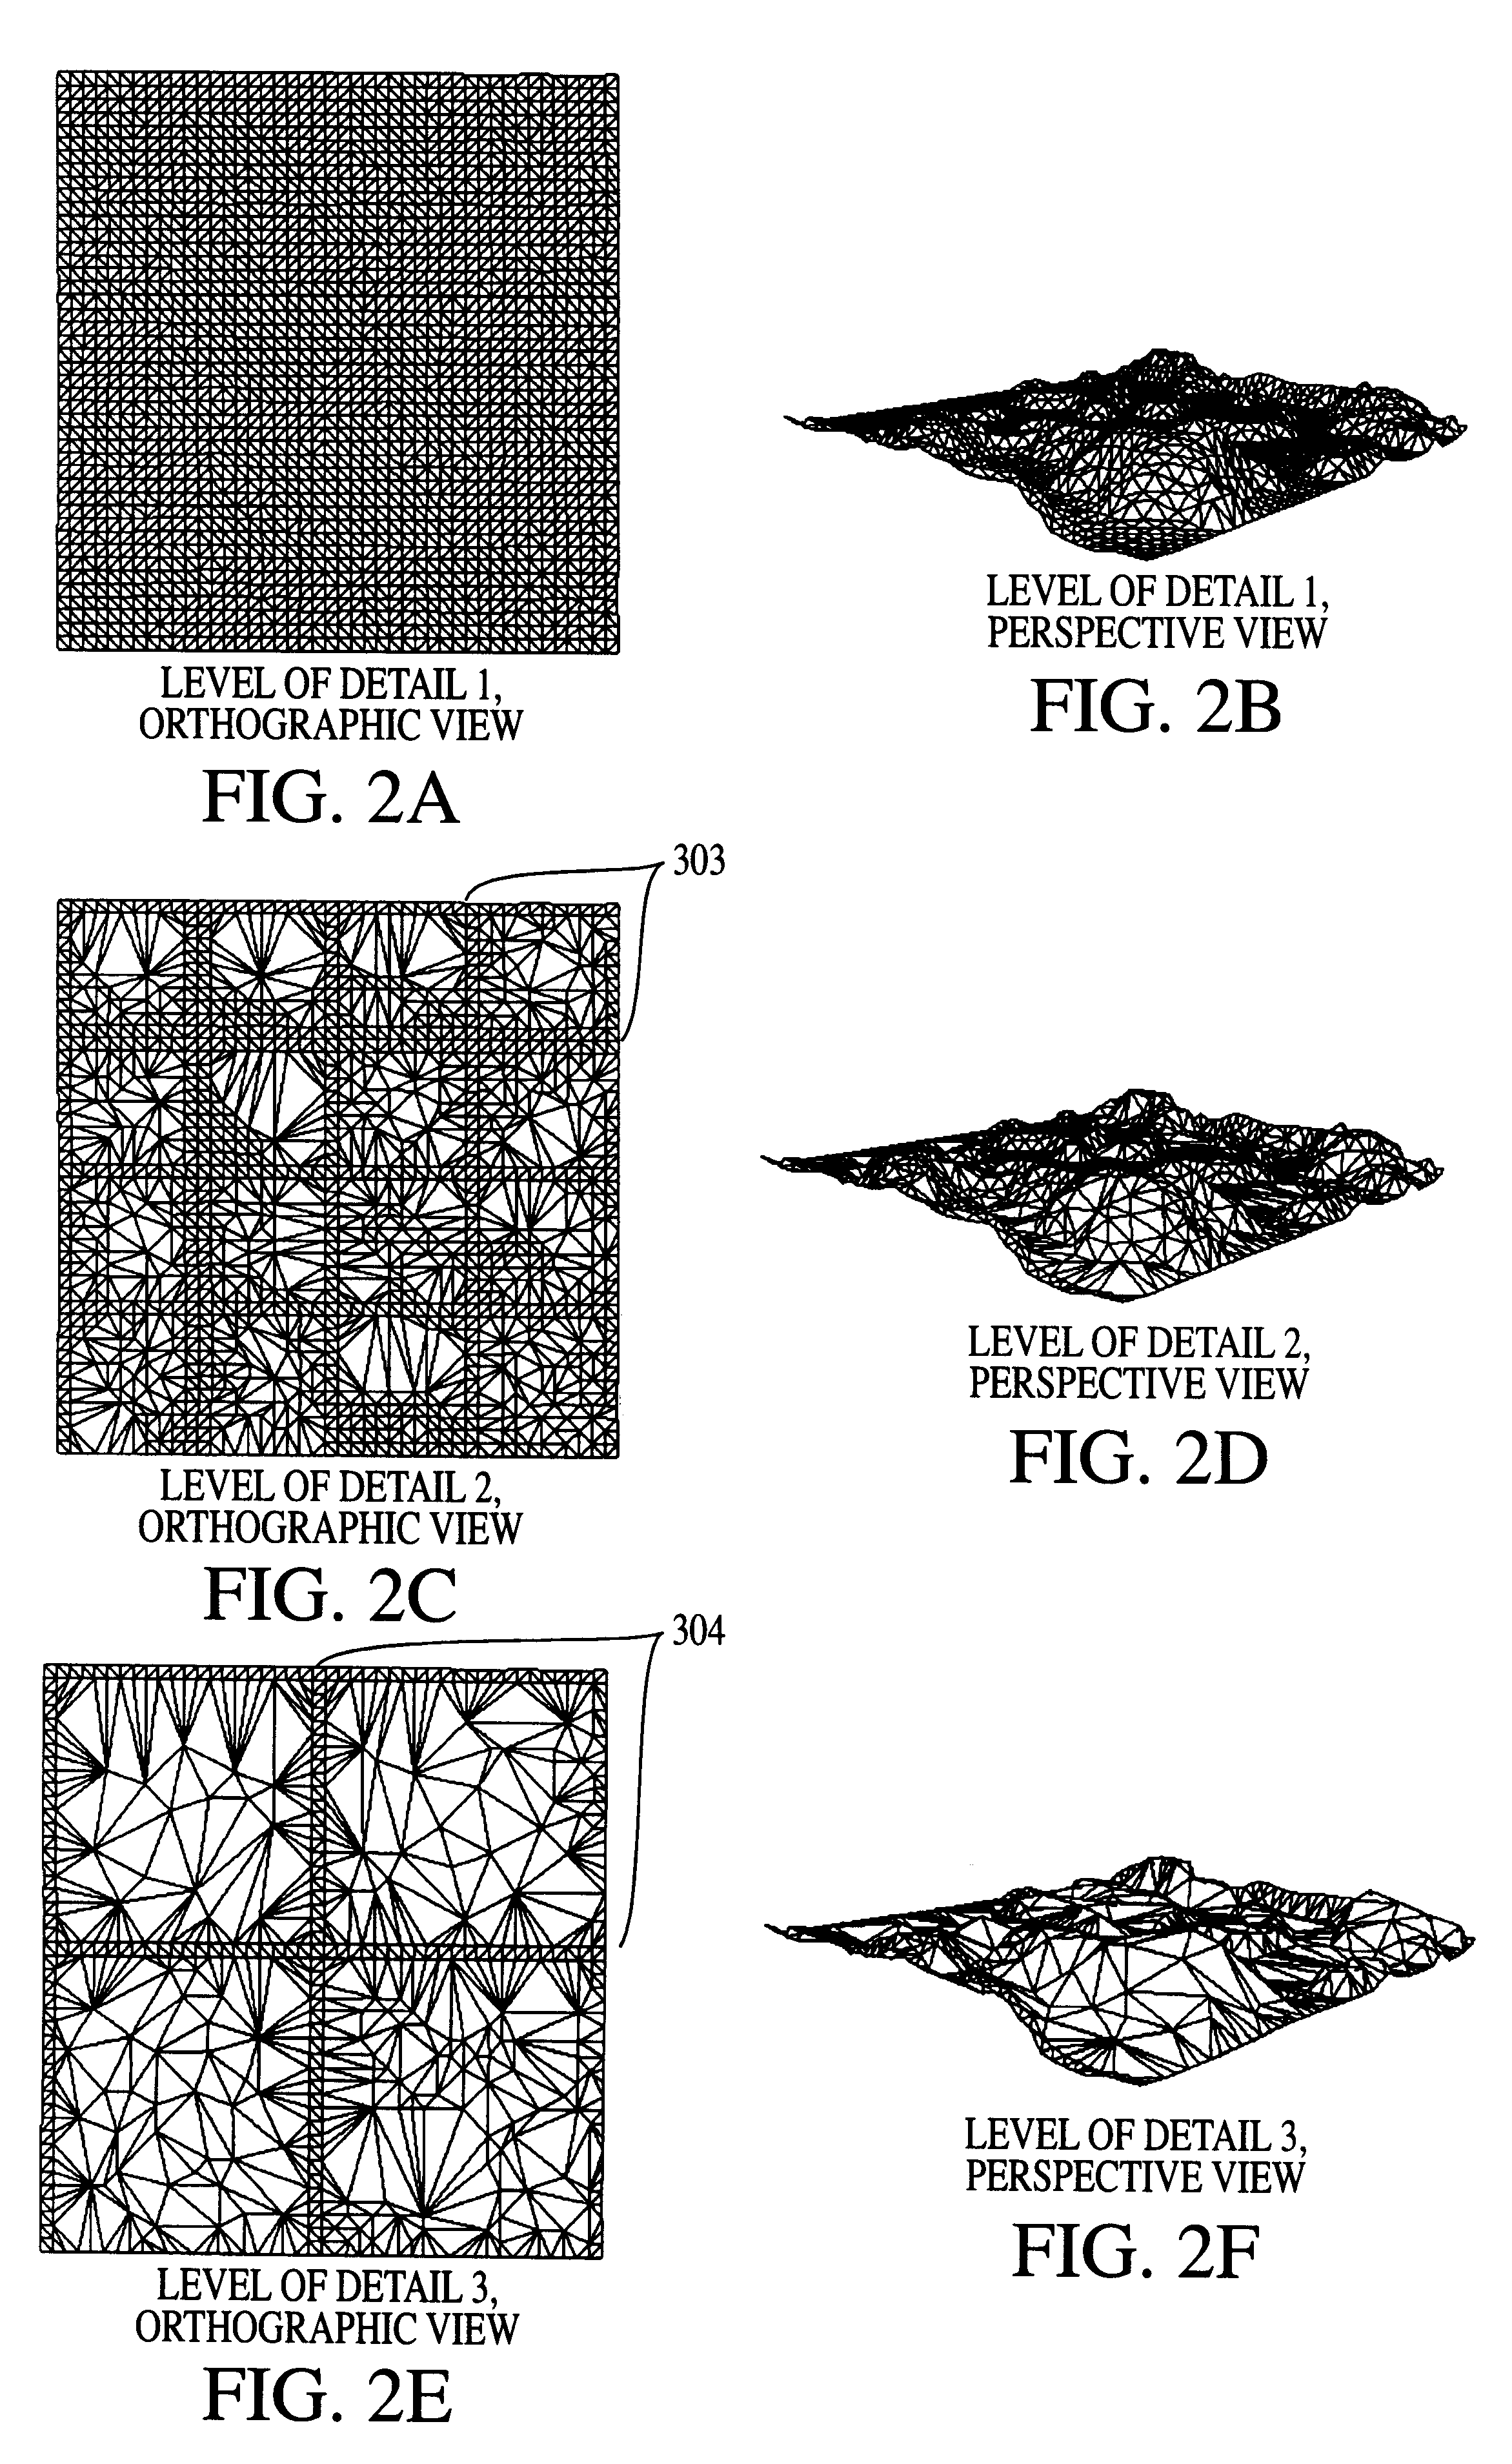 Method for automatically smoothing object level of detail transitions for regular objects in a computer graphics display system